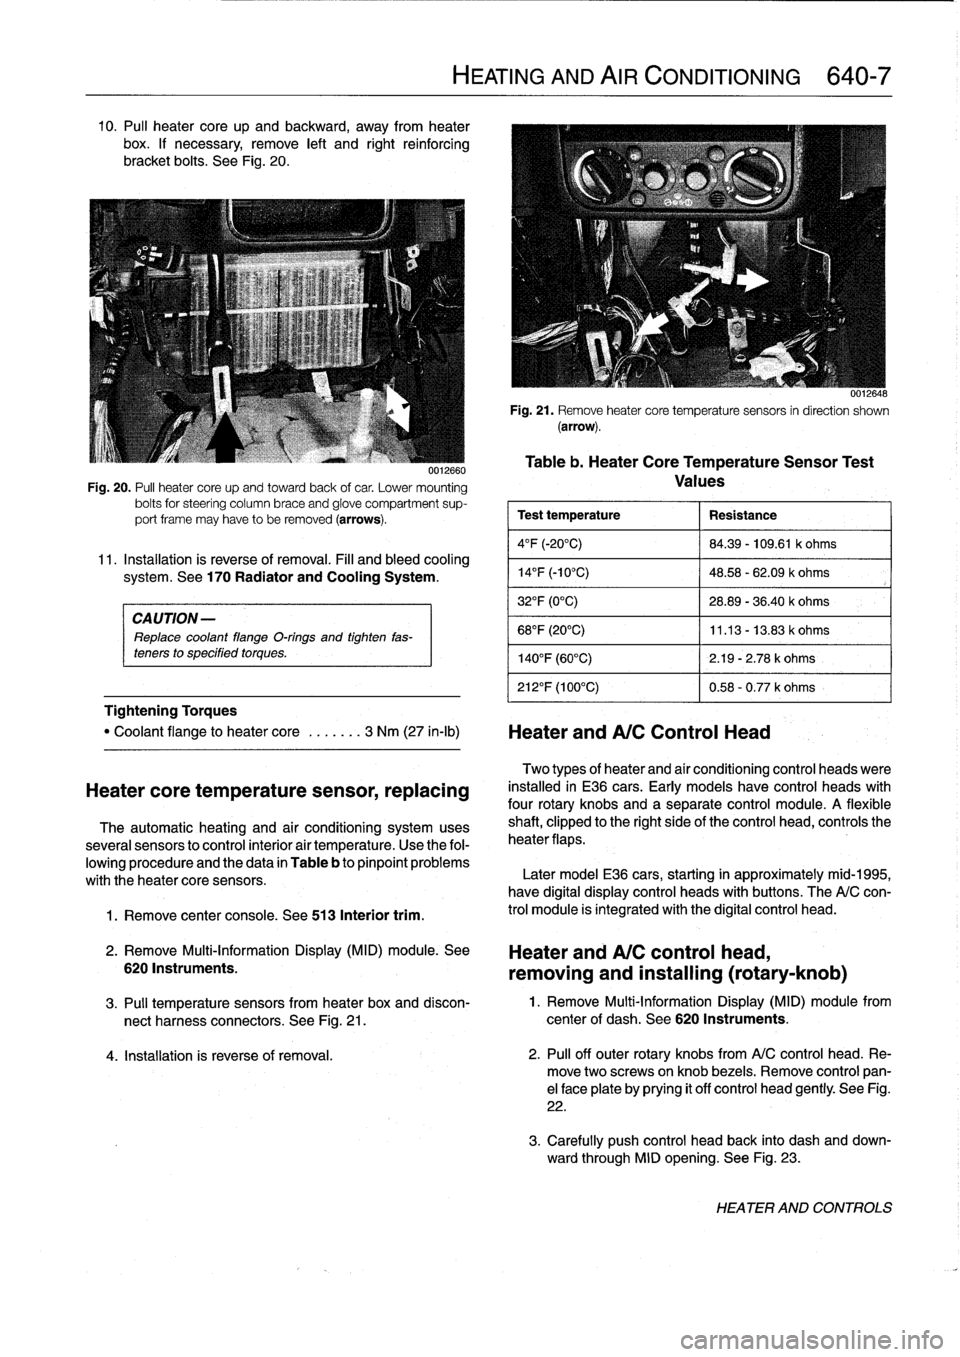 BMW 323i 1993 E36 Workshop Manual 10
.
Pul¡
heater
core
up
and
backward,
away
from
heater
box
.
If
necessary,
remove
left
and
right
reinforcing
bracket
bolts
.
See
Fig
.
20
.

CAUTION-

Replace
coolant
flange
O-rings
and
tighten
fas-